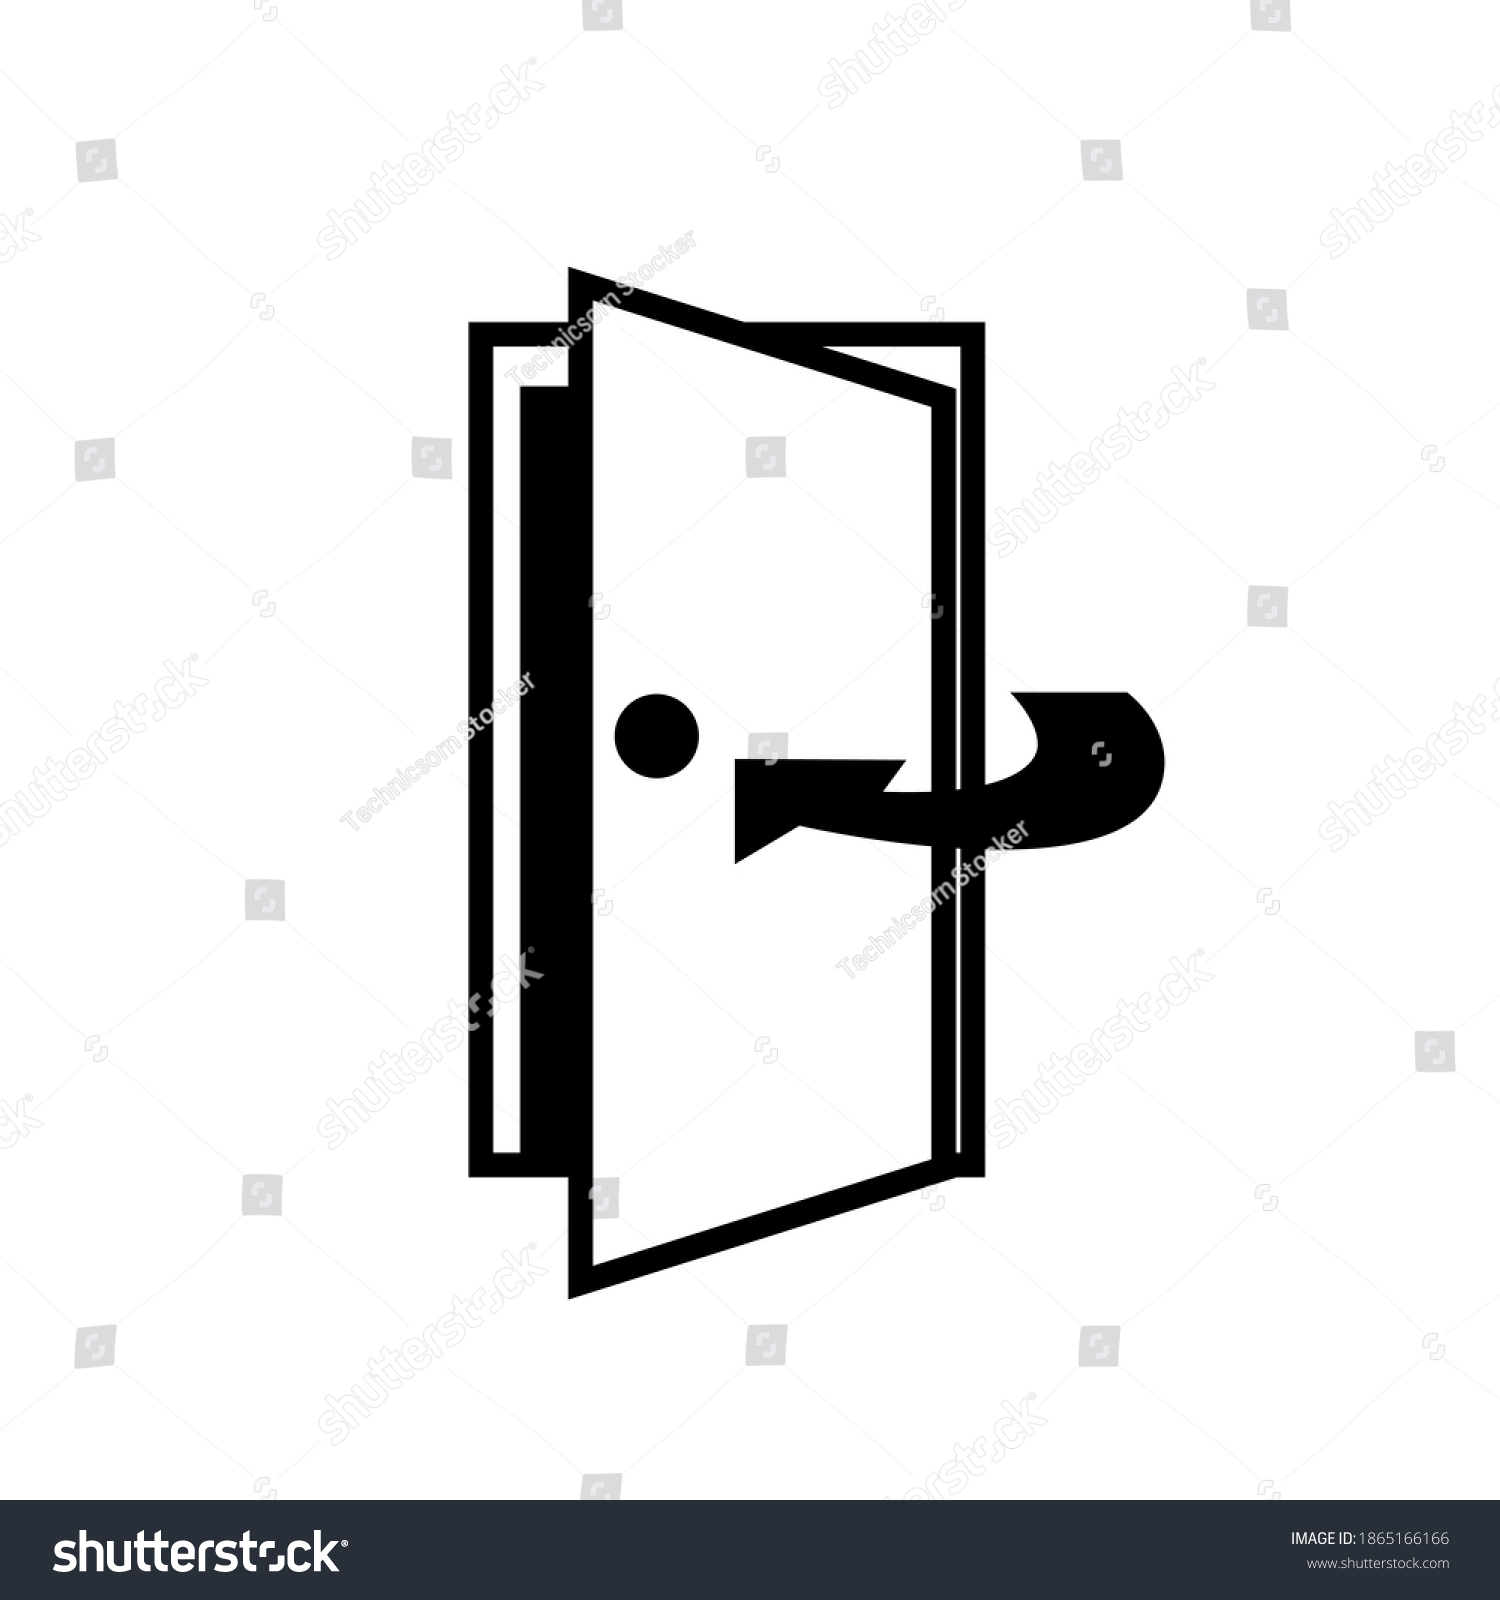 Keep Door Closed Black Icon,Vector Illustration, Isolated On White Background Label. EPS10 #1865166166